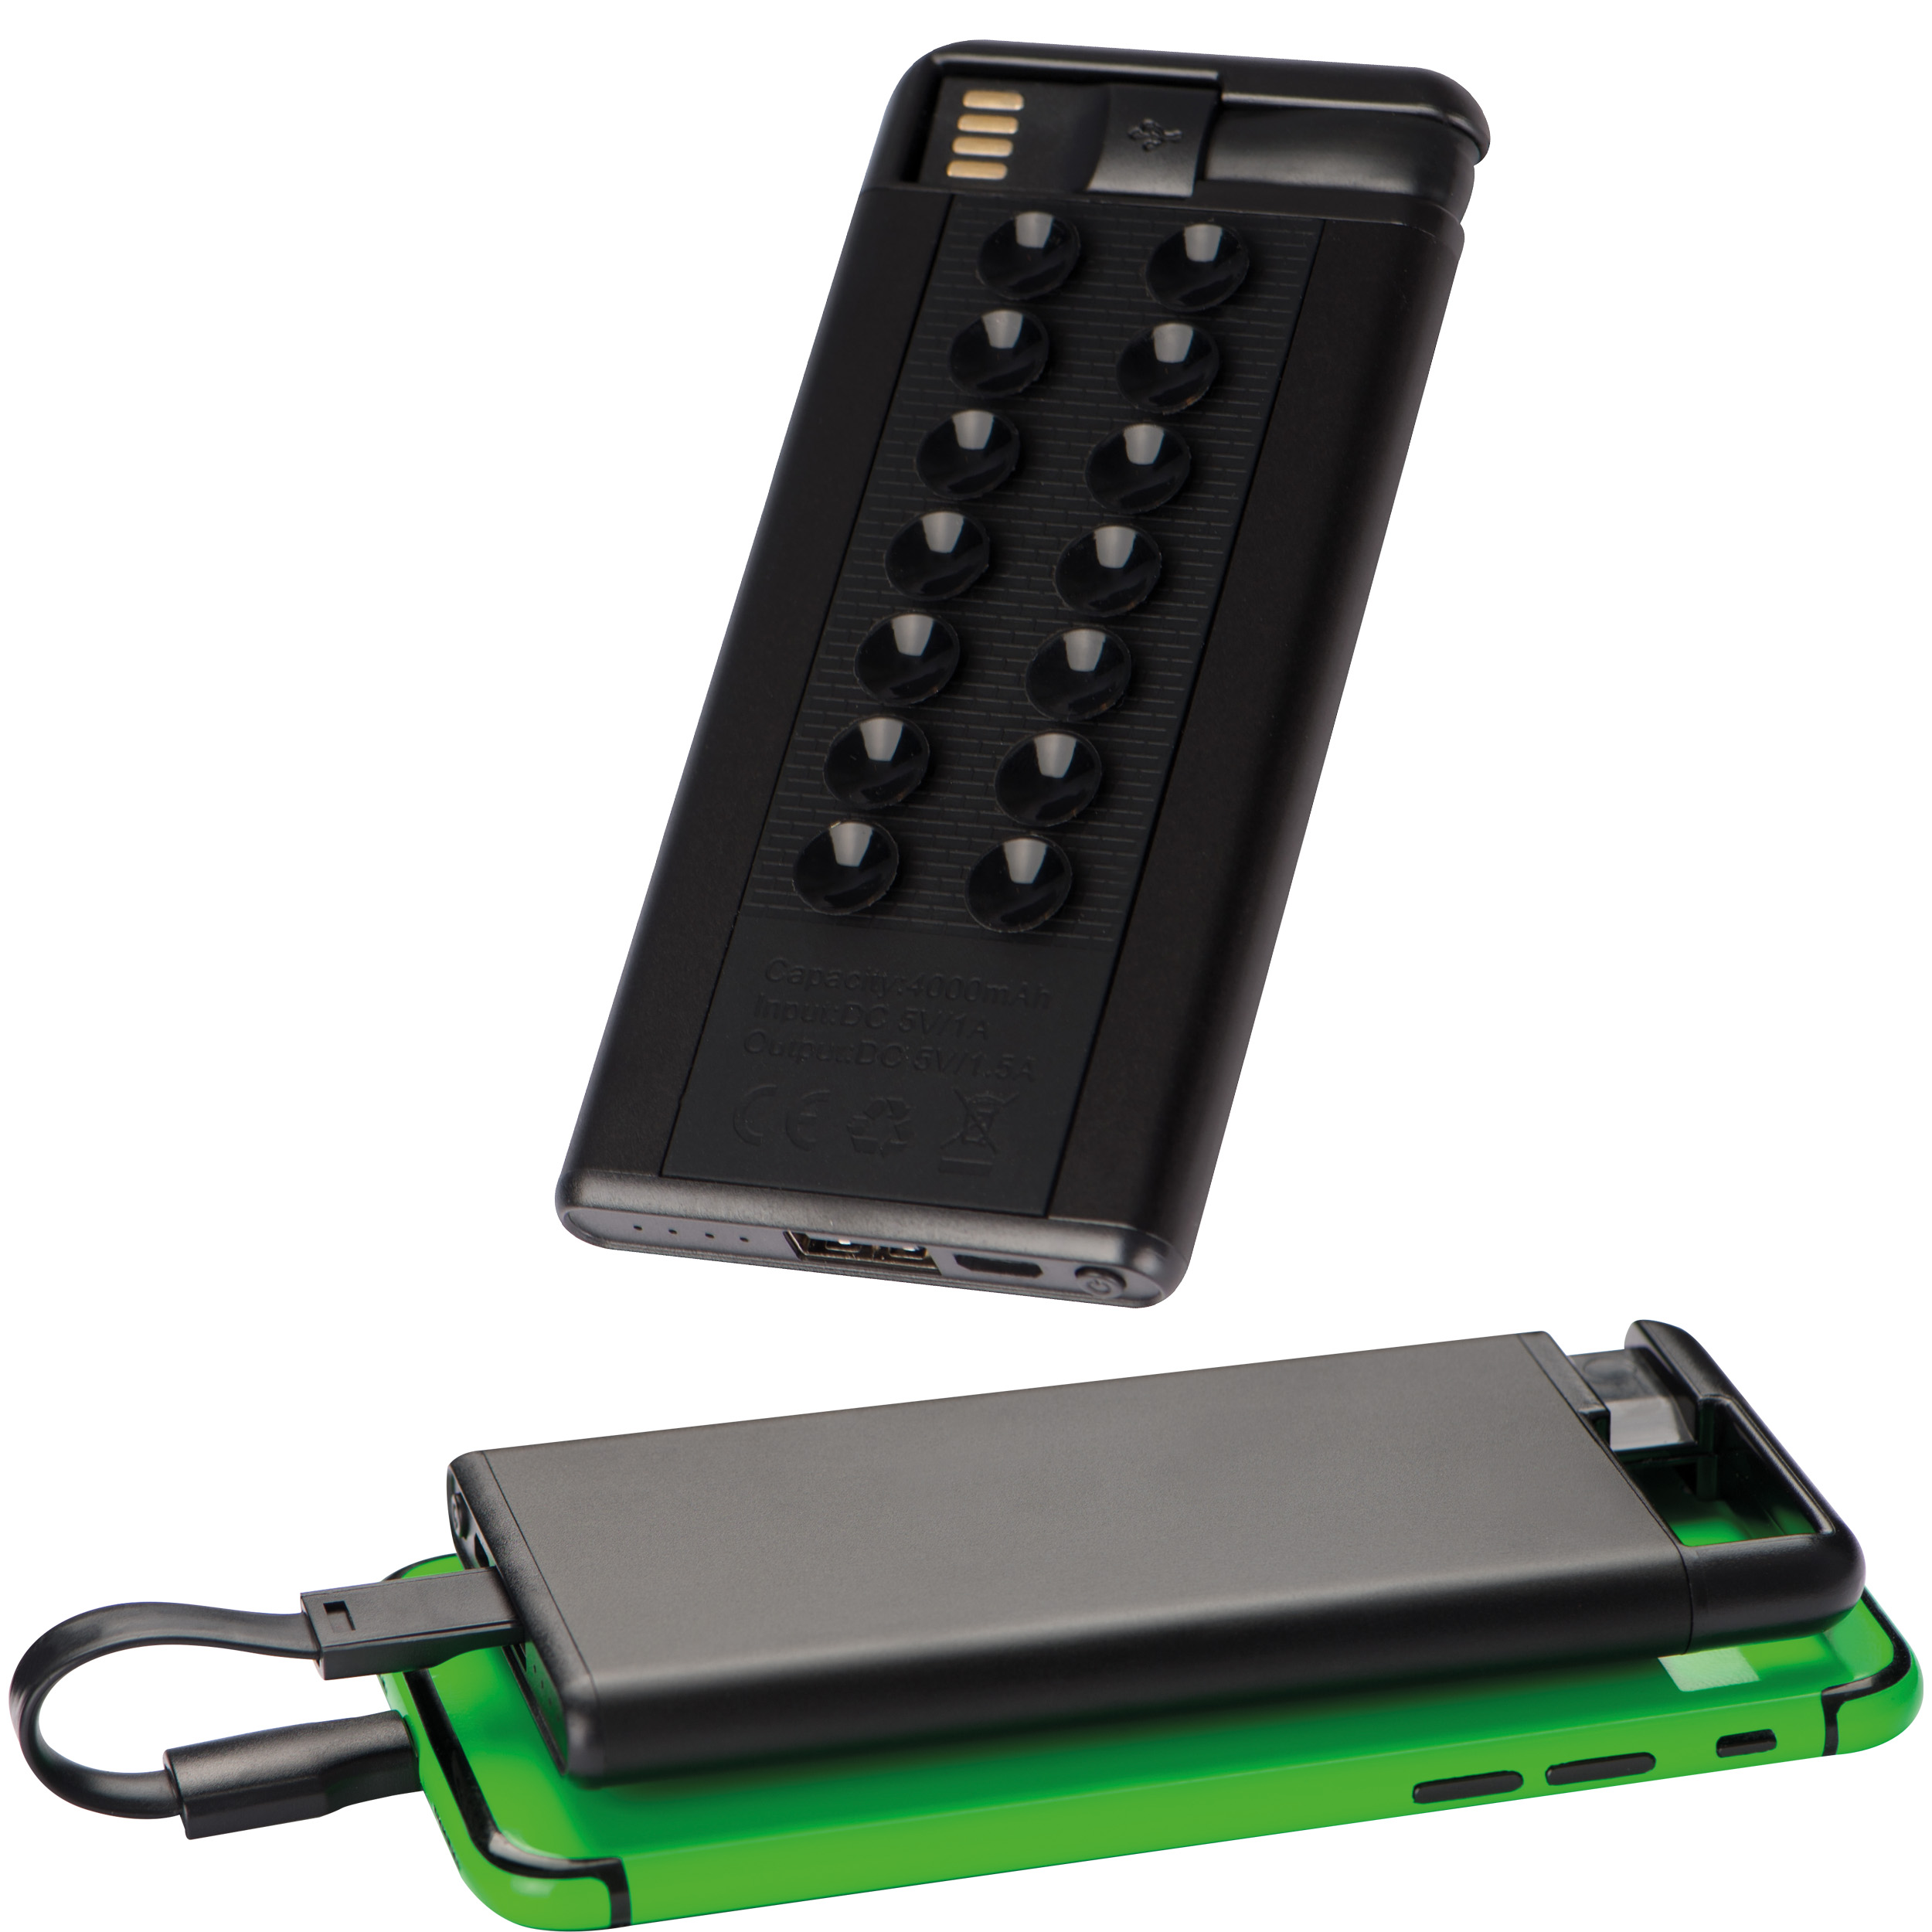 4000 mAh Powerbank with suction cups